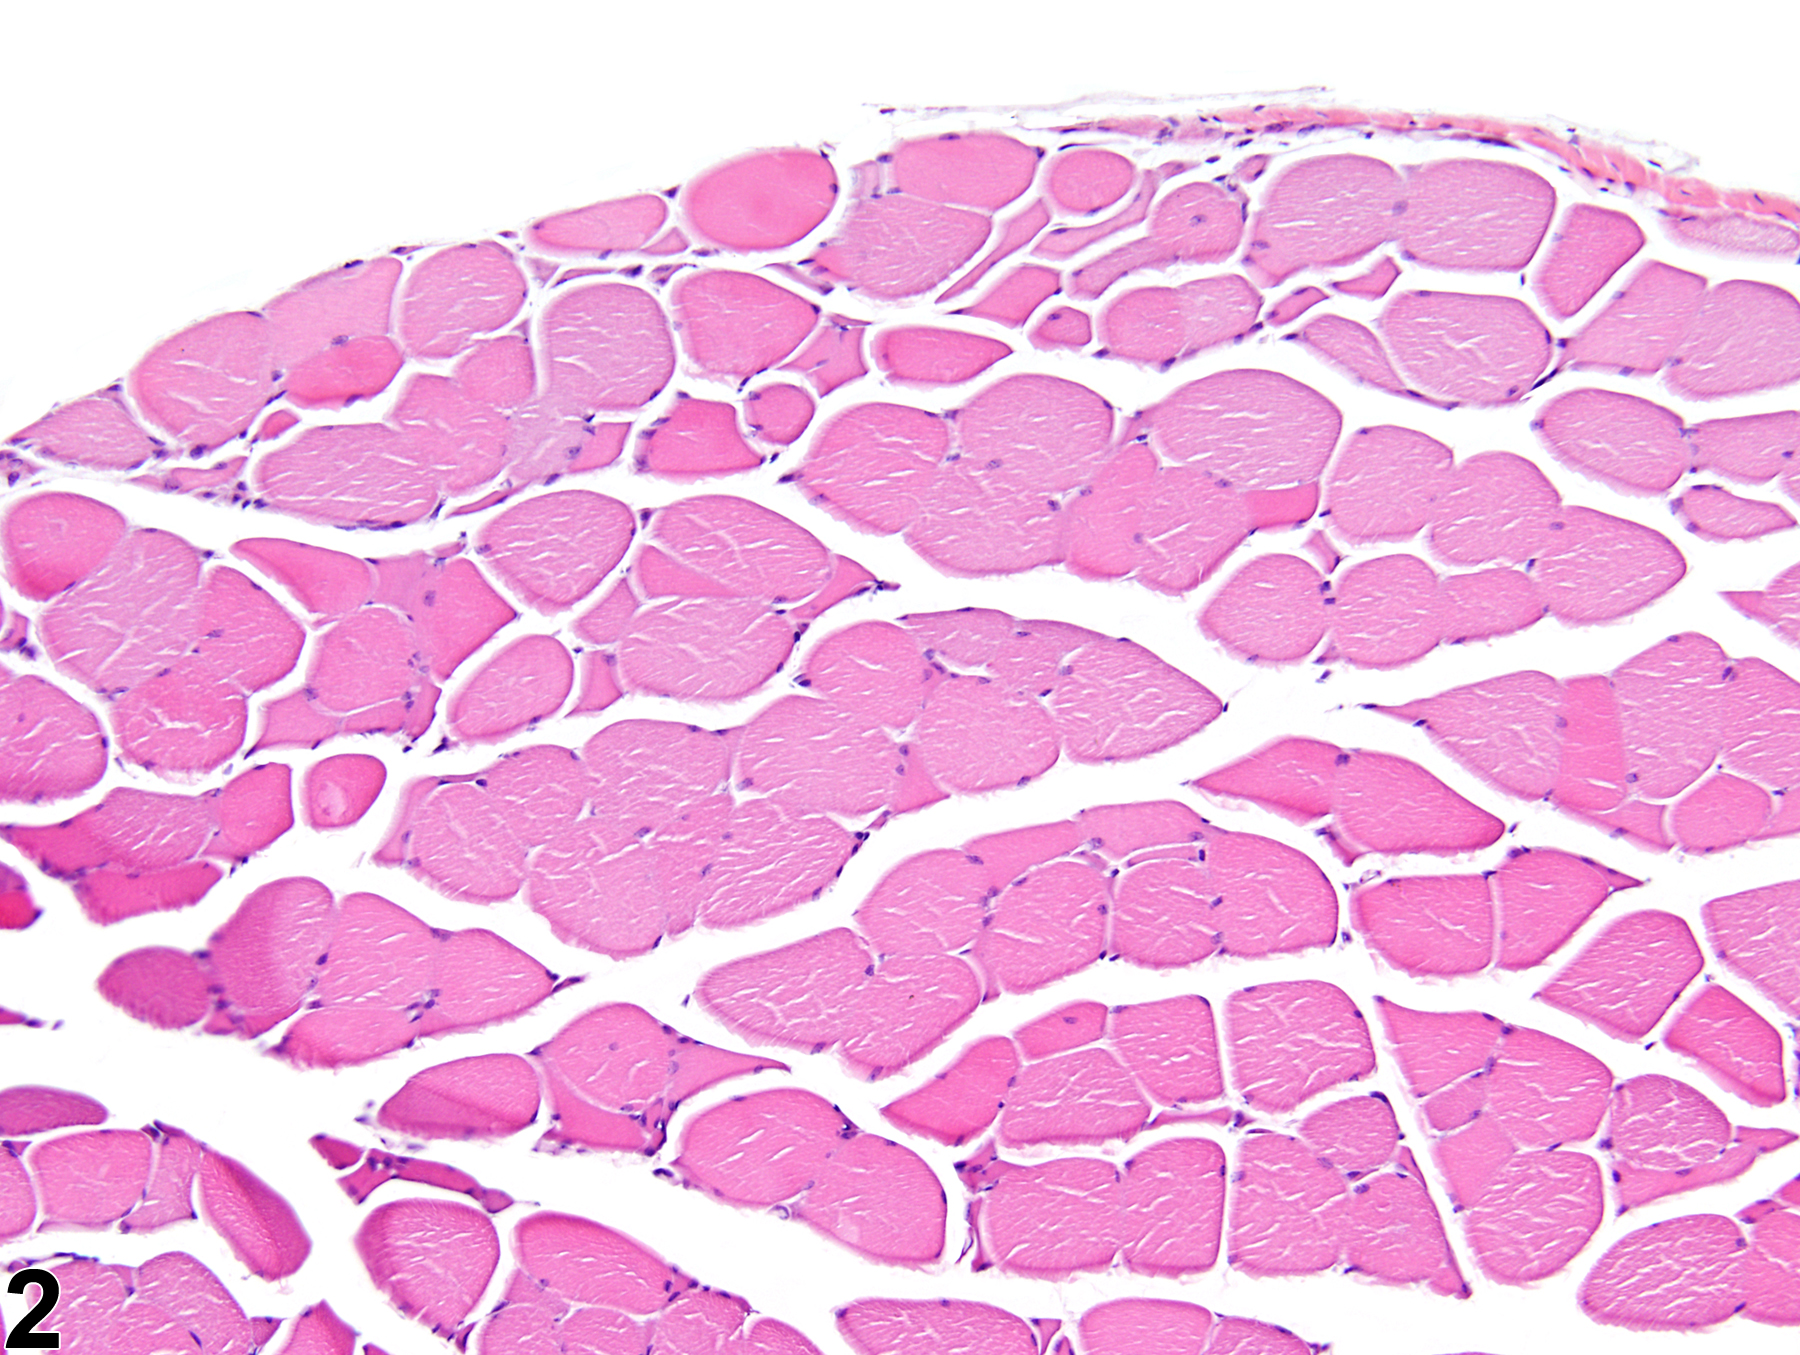 Image of atrophy in the skeletal muscle from a male B6C3F1/N mouse in a subchronic study